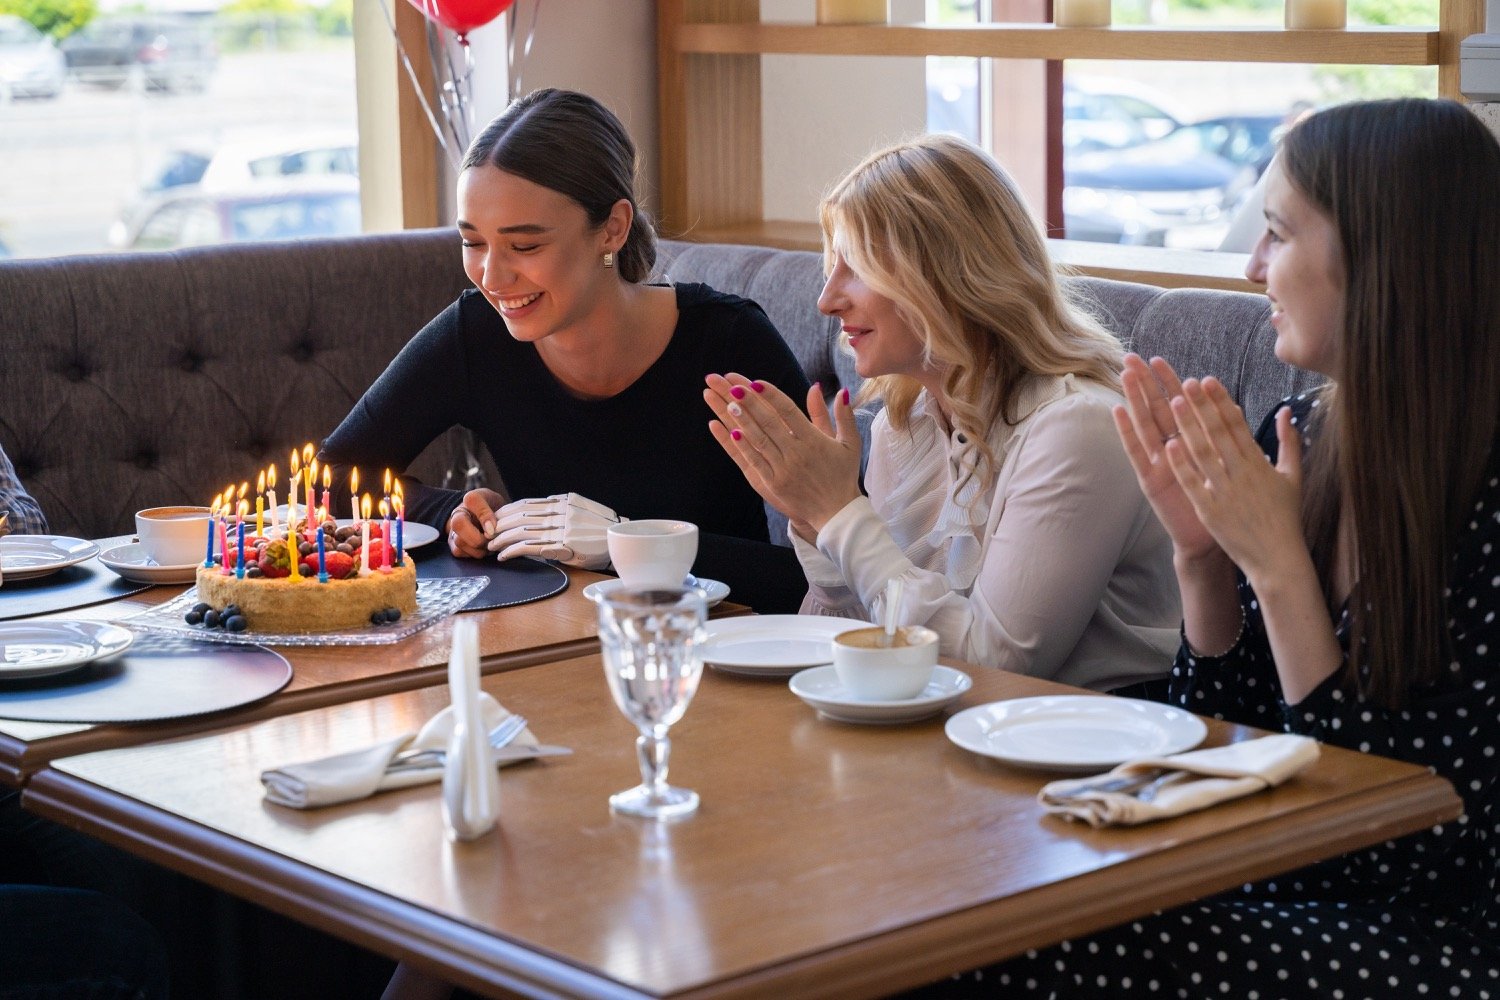 How to Step Up Your Marketing Strategy with Customer Birthday Promotions